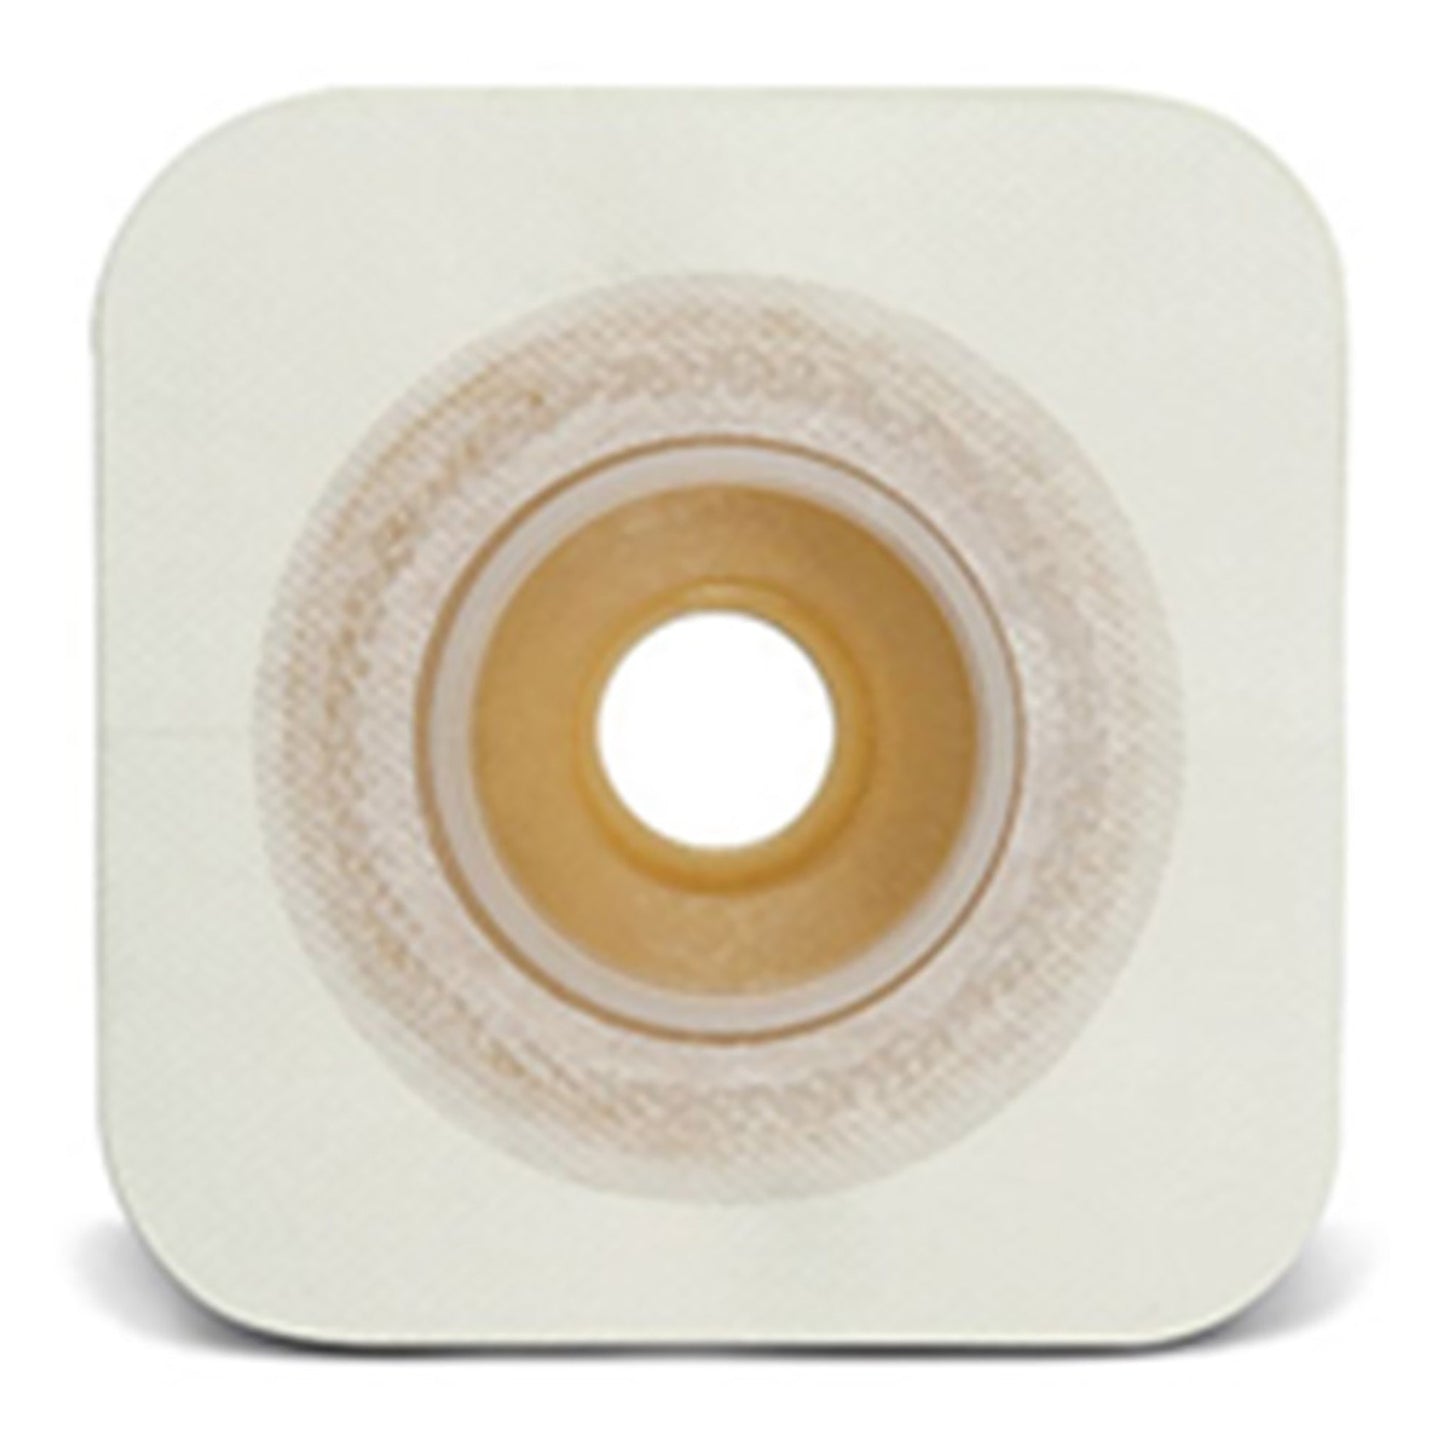 Sur-Fit Natura® Durahesive® Ostomy Barrier With 1.25-1.75 " Stoma Opening